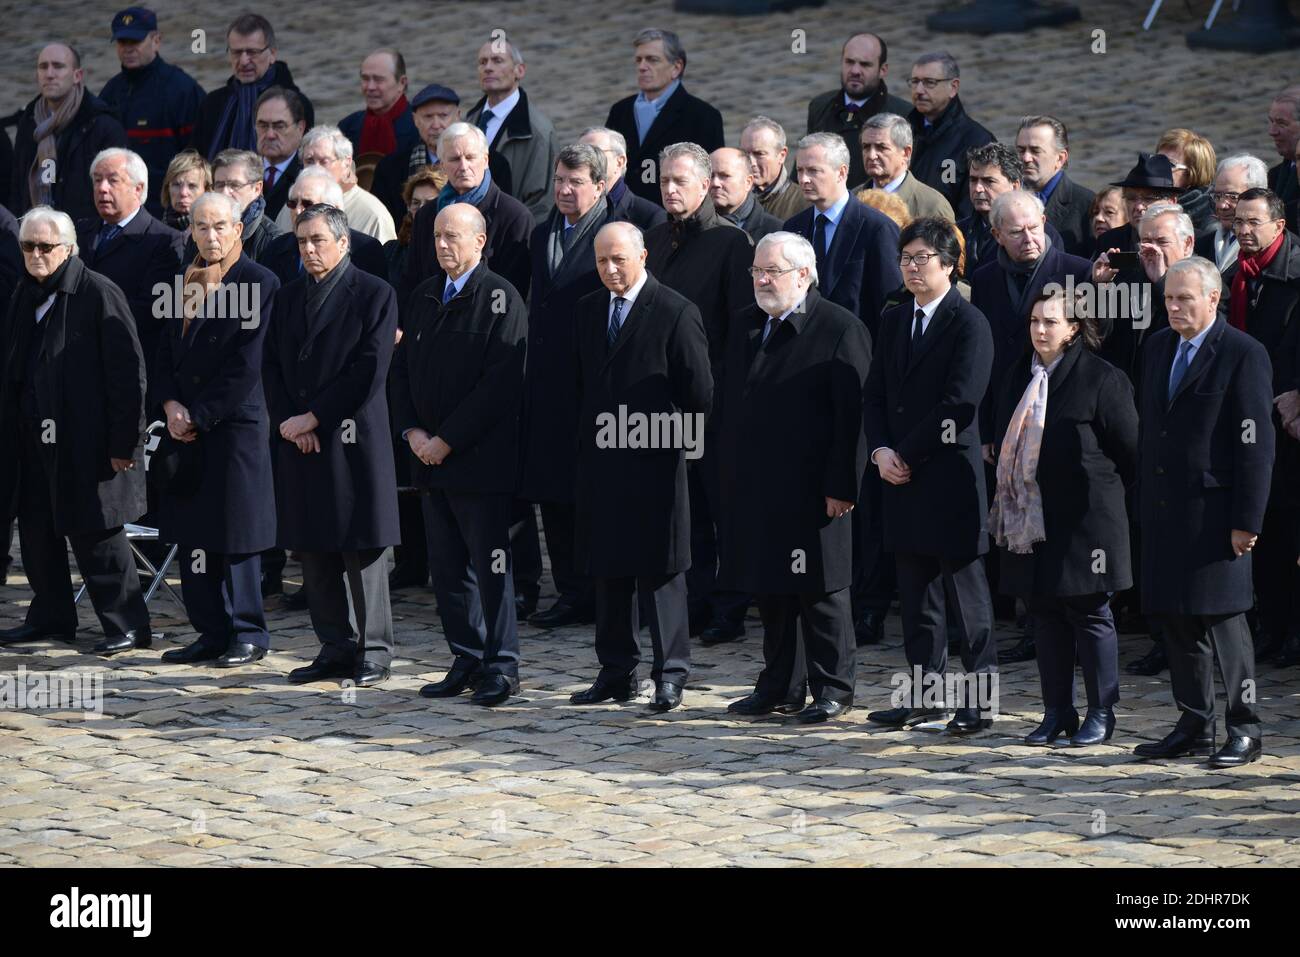 L-R : Roland Dumas, Robert Badinter, Francois Fillon, Alain Juppe, Laurent  Fabius, Jean-Marc Todeschini, Jean-Vincent Place, Emmanuelle Cosse, Jean-Marc  Ayrault attend national tribute to Yves Guena, in the courtyard of the  Invalides,